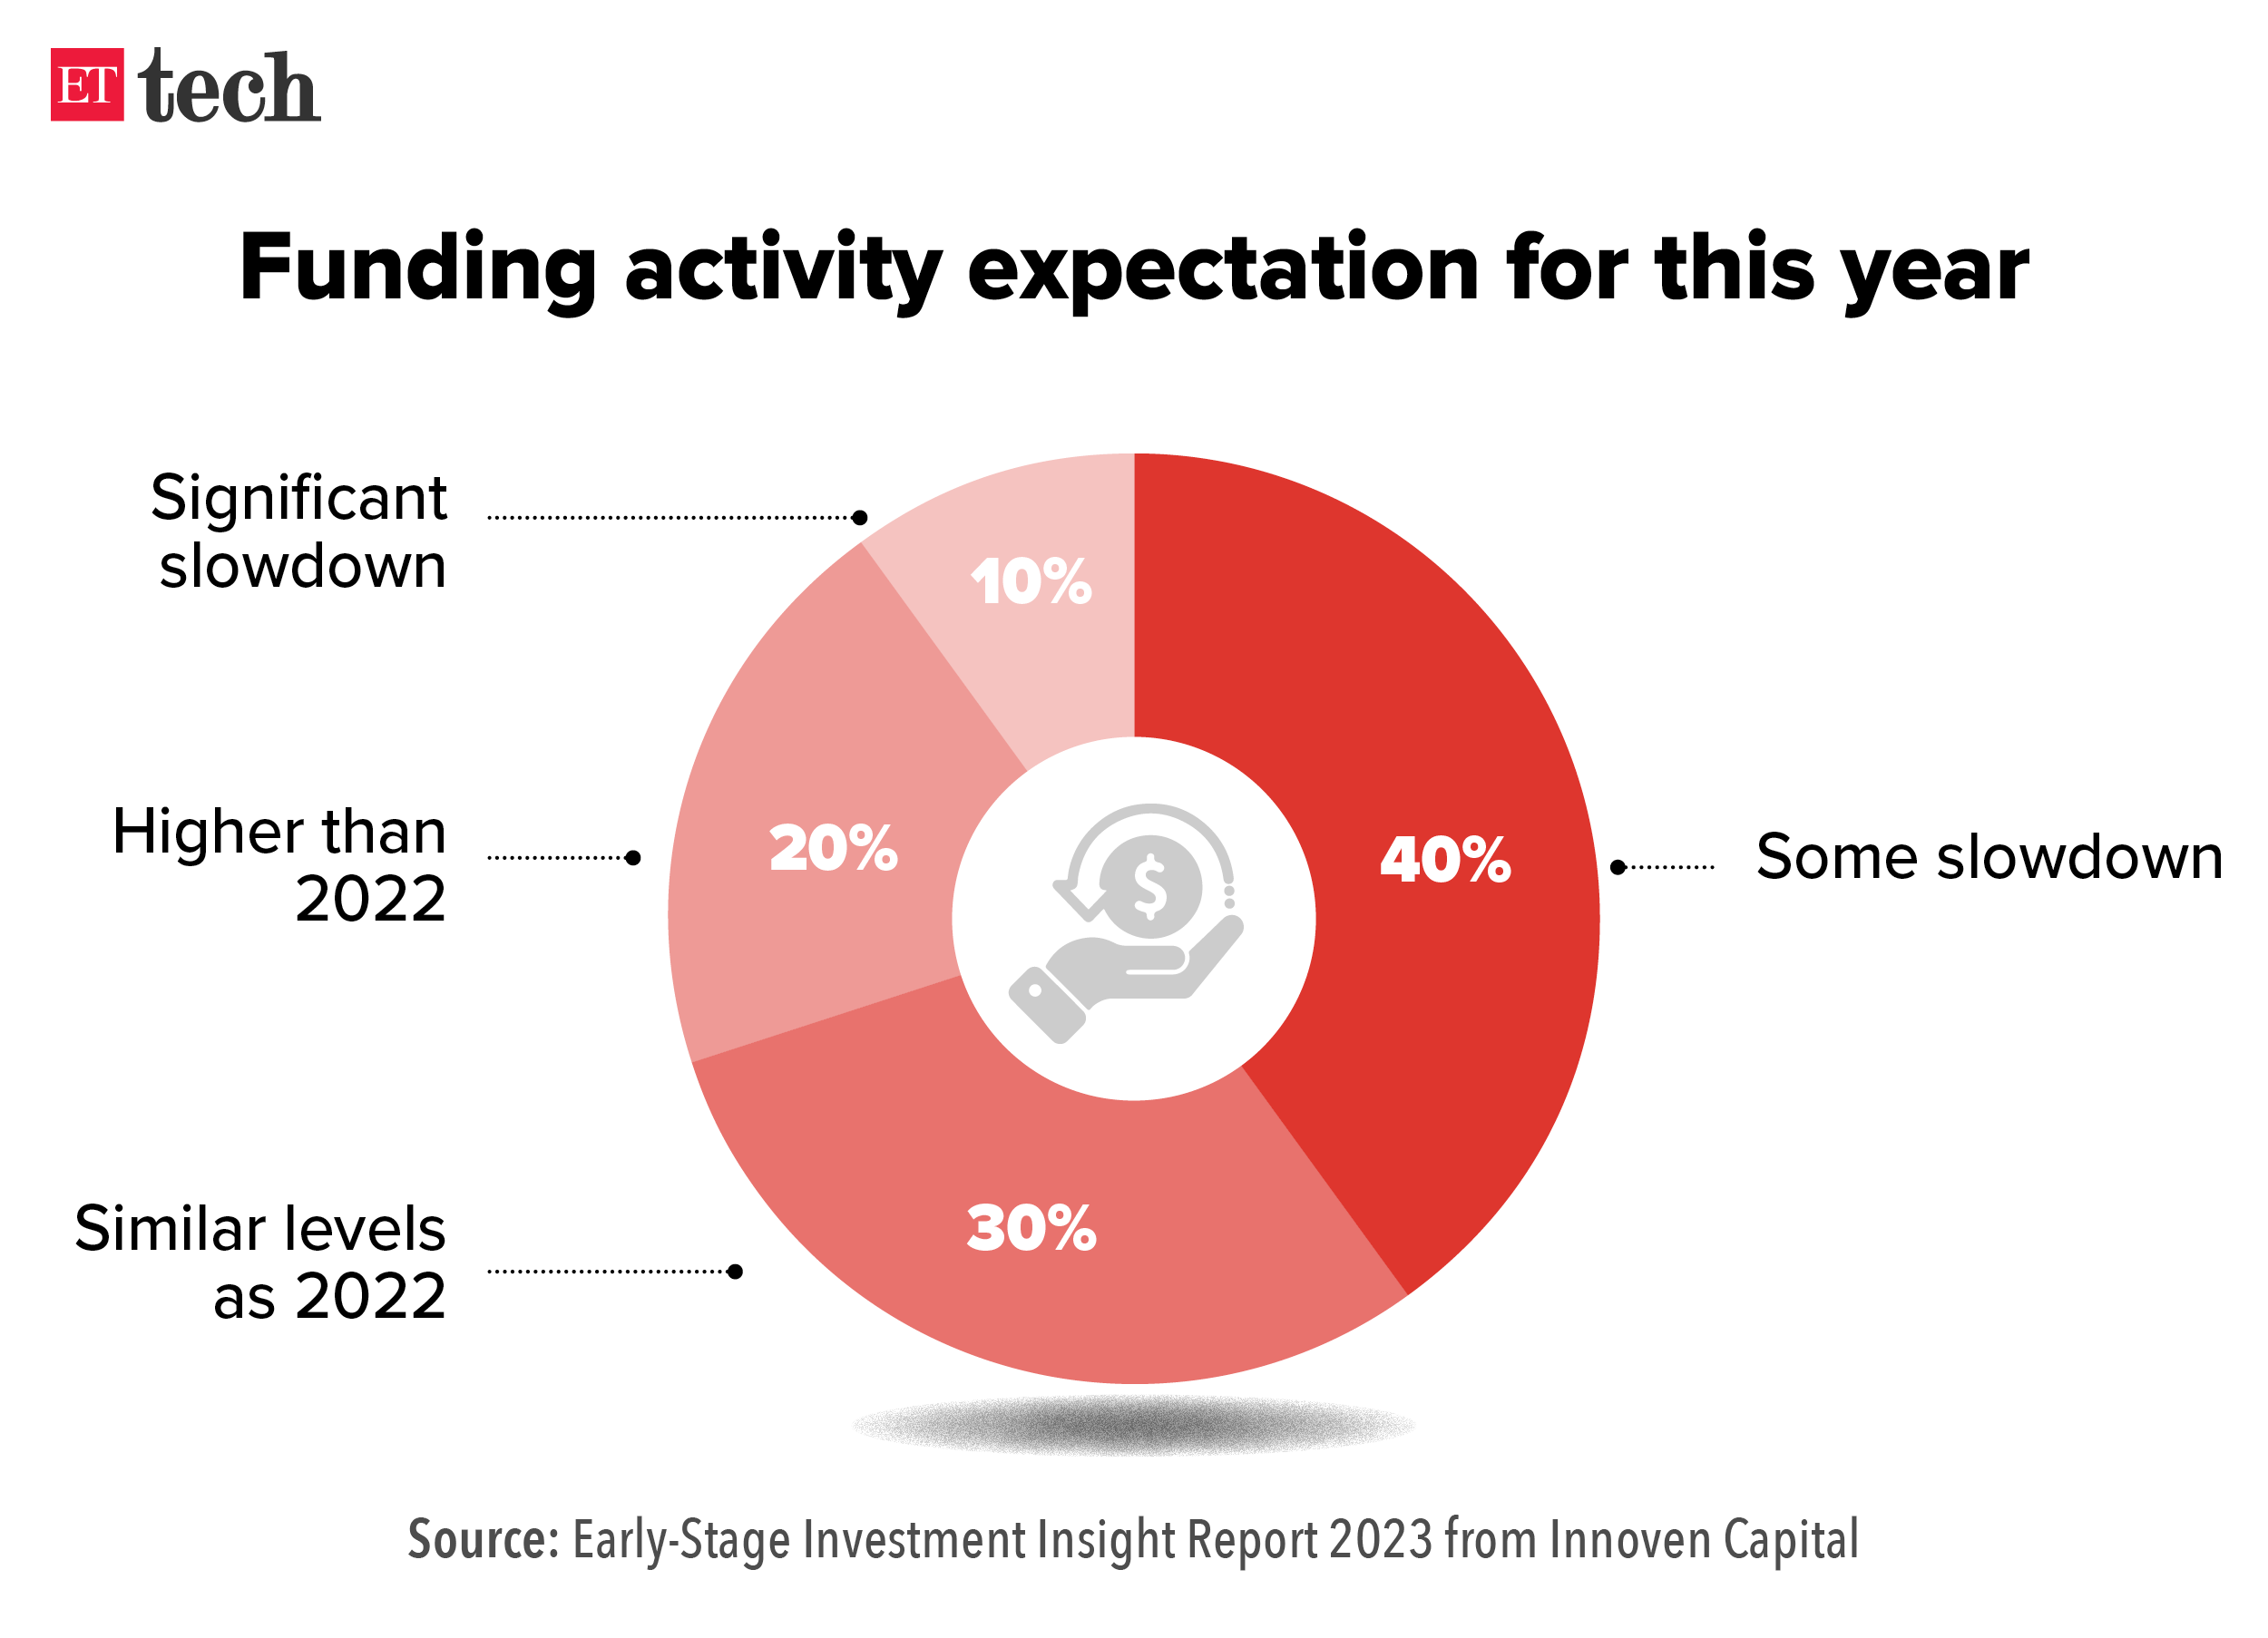 Funding activity expectation for 2023_Graphic_ETTECH